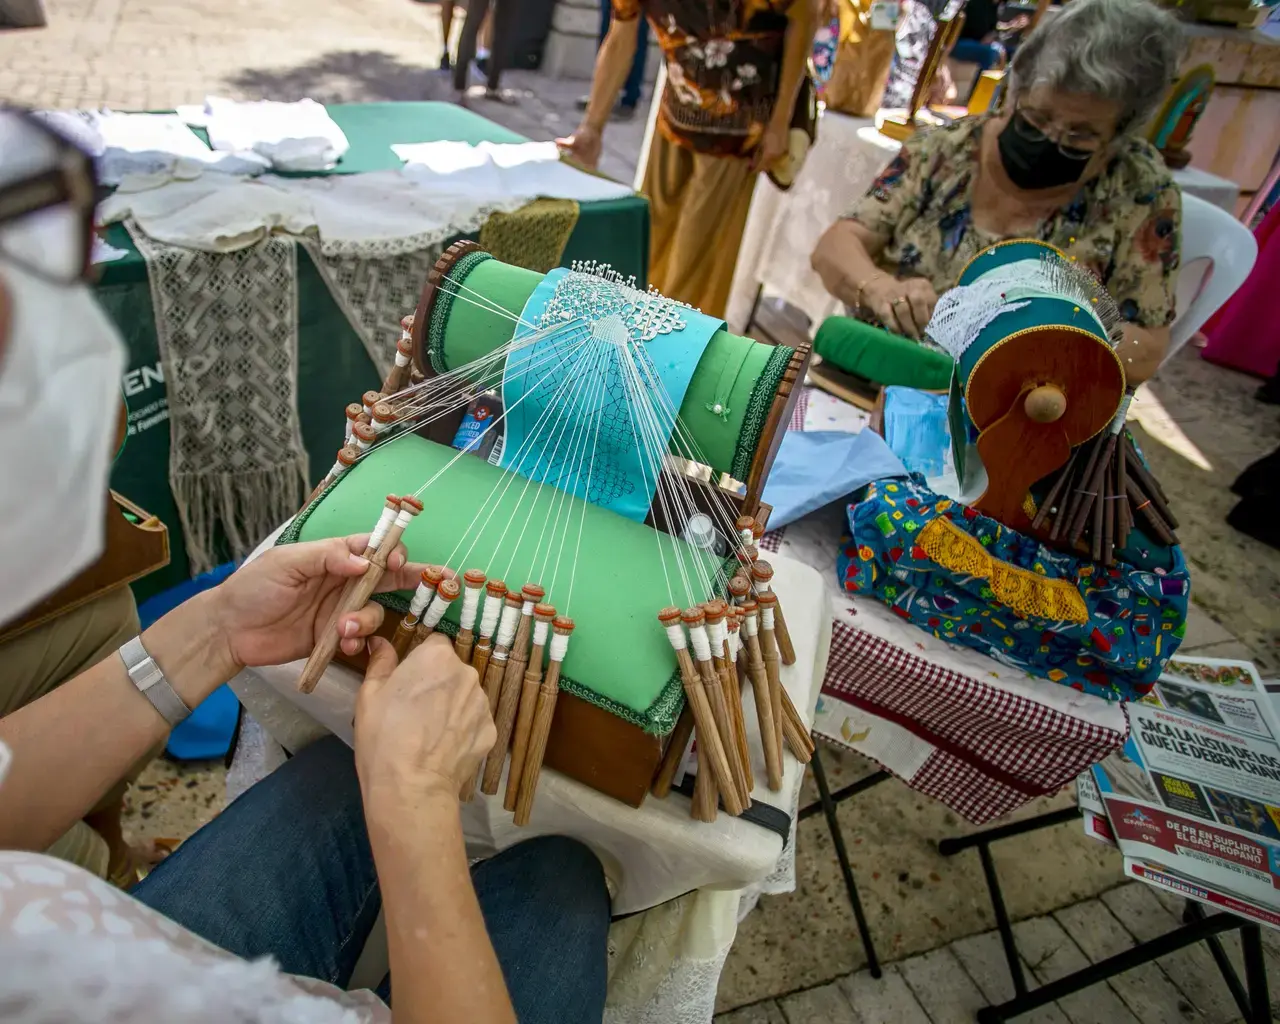 Carmen Arteaga demonstrates the intricate bobbin lace-making technique called mundillo, or “little world.” Guatemalan and Puerto Rican designers are leading textile workshops for Taller Puertorriqueño’s Tramando. Photo by Xavier Garcia, courtesy of Taller Puertorriqueño.